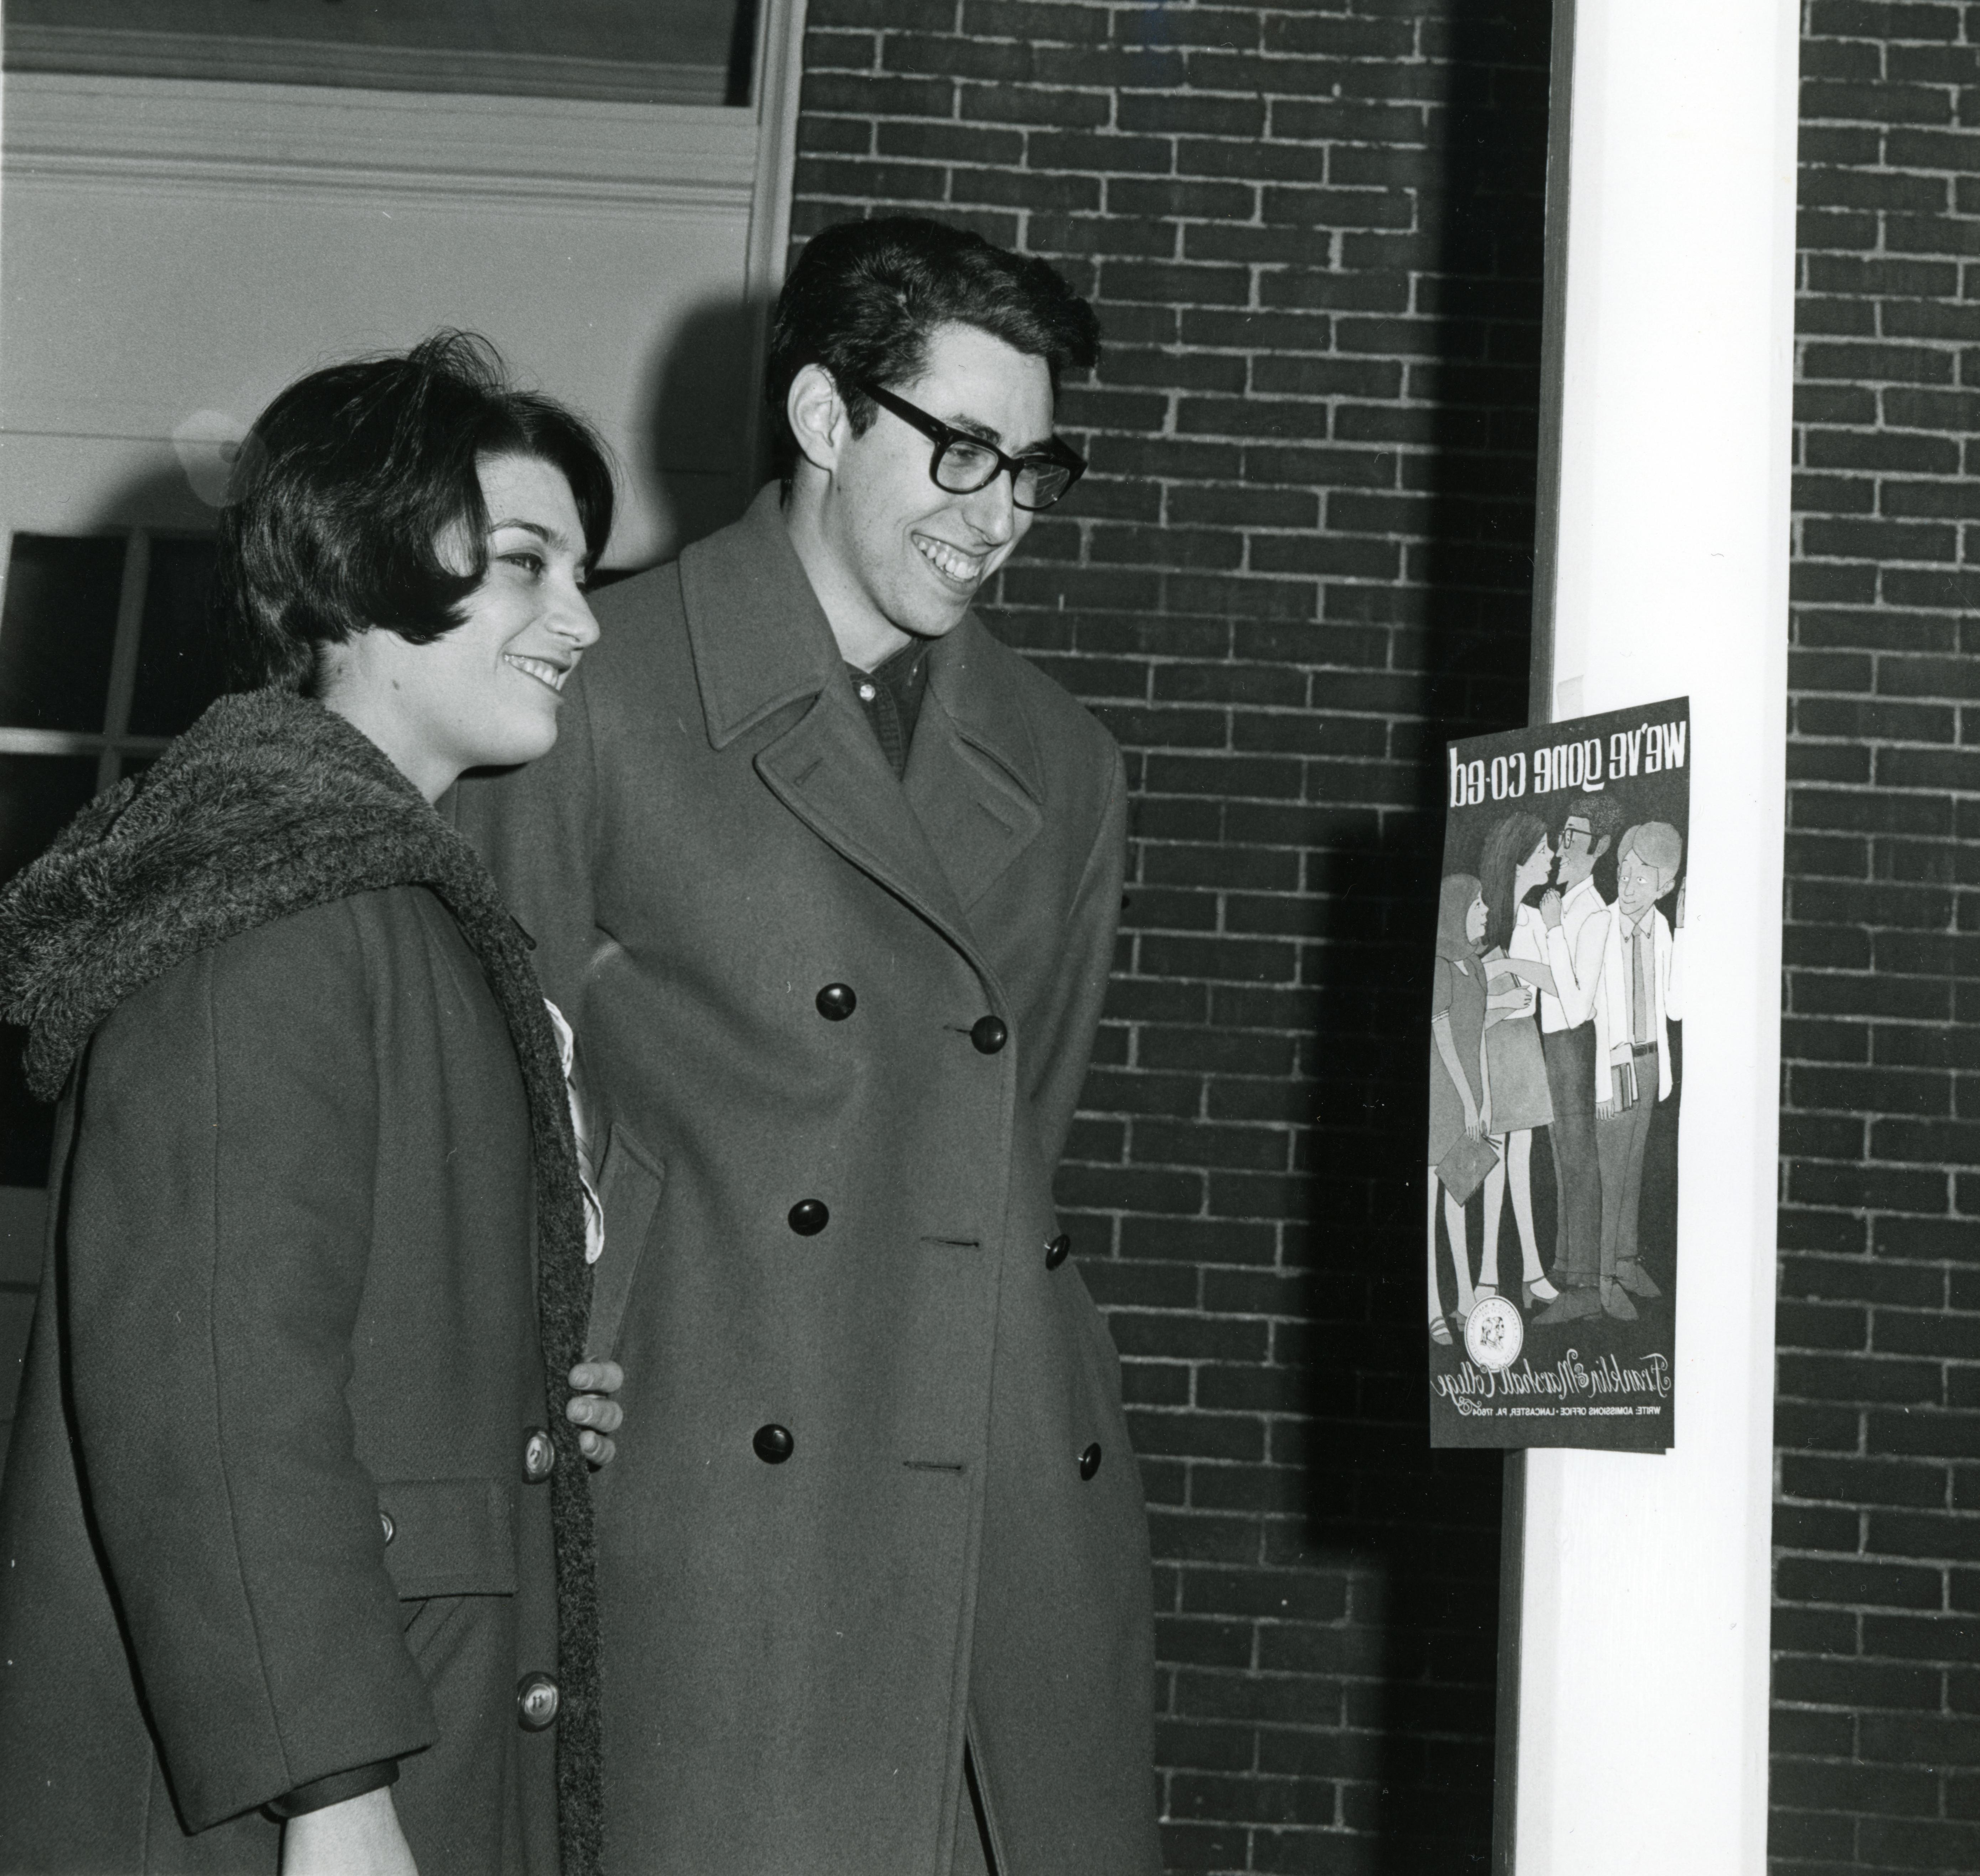 Two students looking at a poster reading "We've gone coed." Notes on the verso suggest that the photograph was printed in an F&M publication.